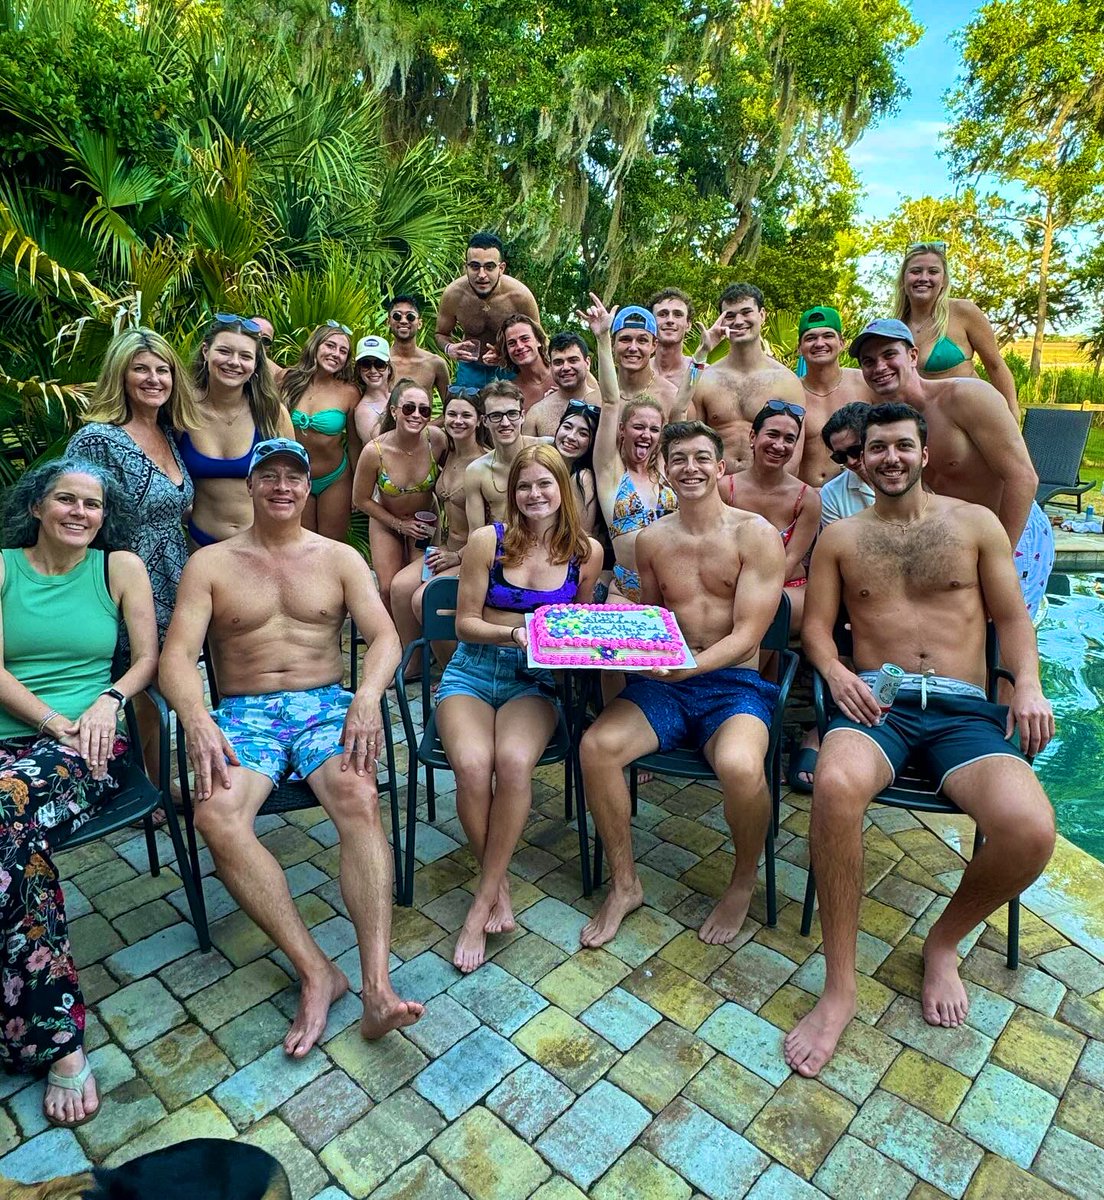 Had my 24th birthday party over the weekend! Been doing this YouTube stuff since I was 15 and I don’t plan on stopping anytime soon! Cheers to the future! Love you guys 🥳❤️